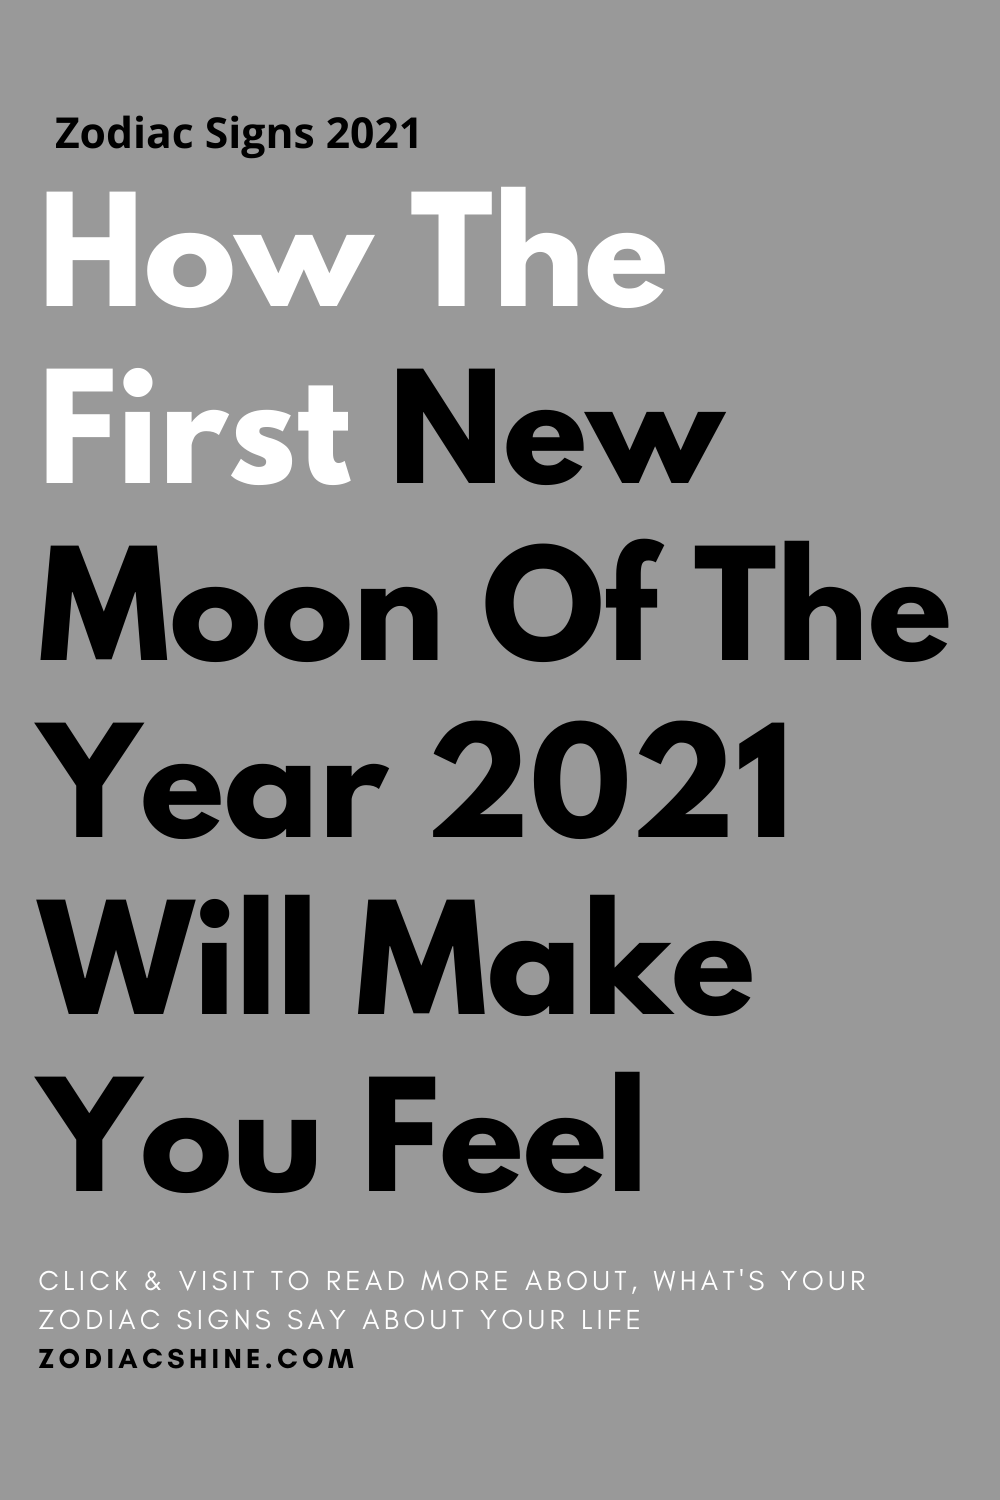 How The First New Moon Of The Year 2021 Will Make You Feel